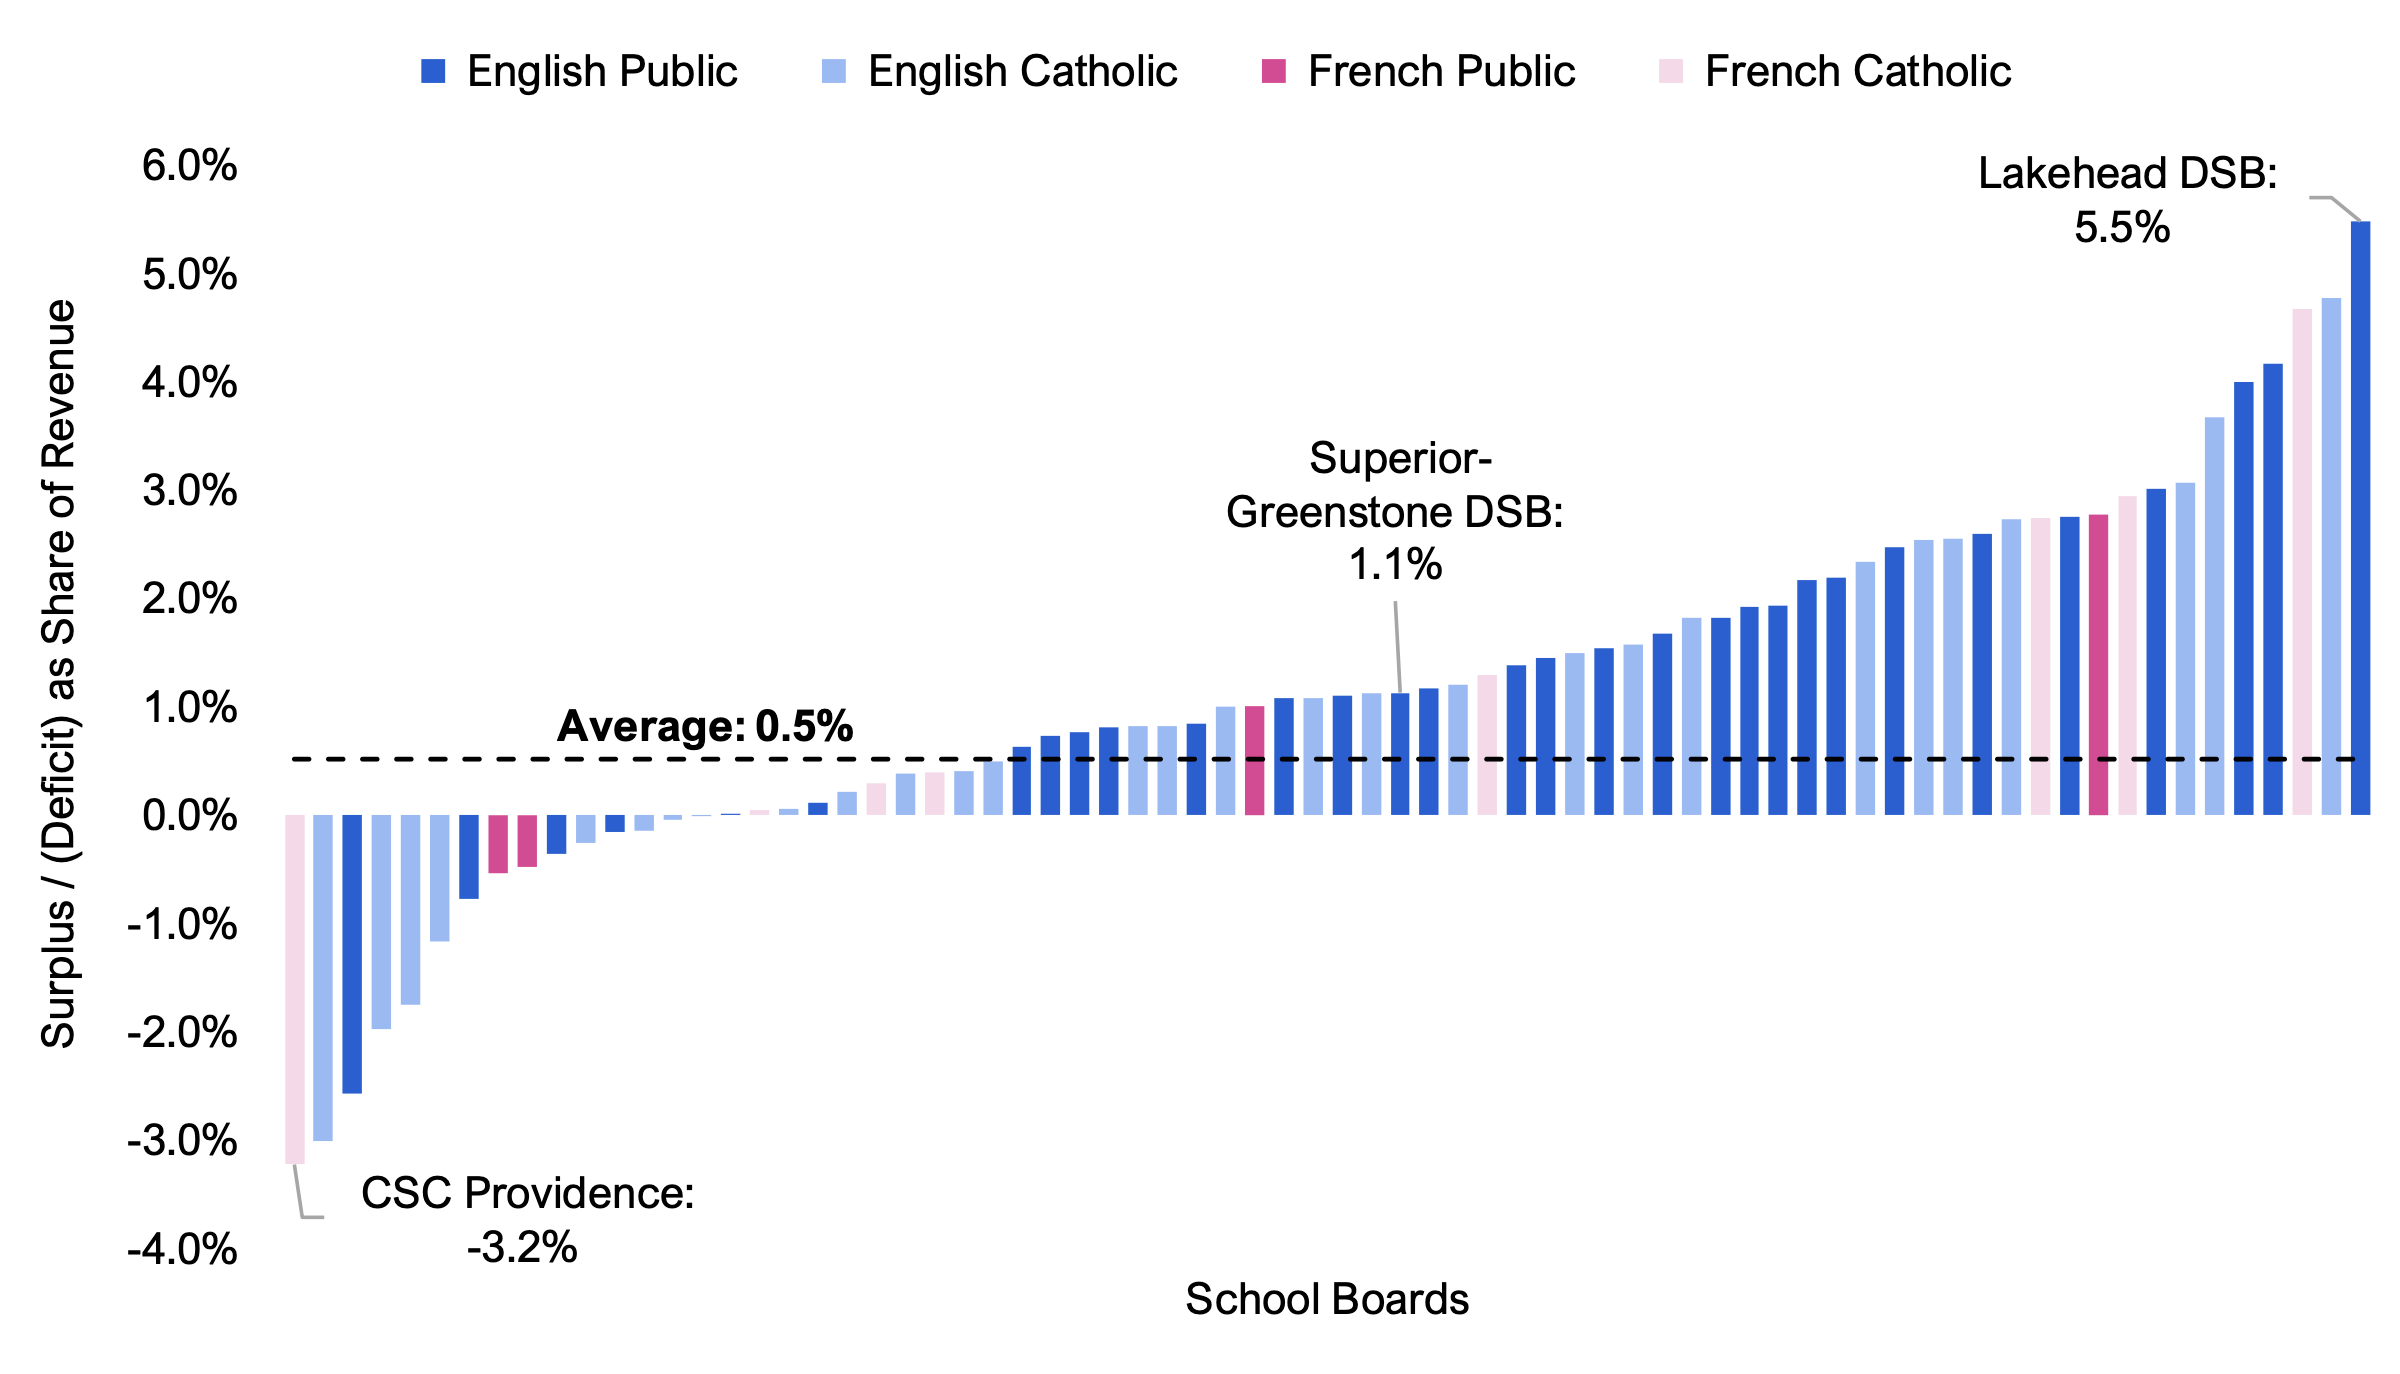 Figure 7.1 shows school boards’ budget balance as a share of revenue by school board, broken down by school system. The values range from a low of -3.2 per cent for the CSC Providence to a high of 5.5 per cent for the Lakehead DSB, with an overall average of 0.5 per cent.